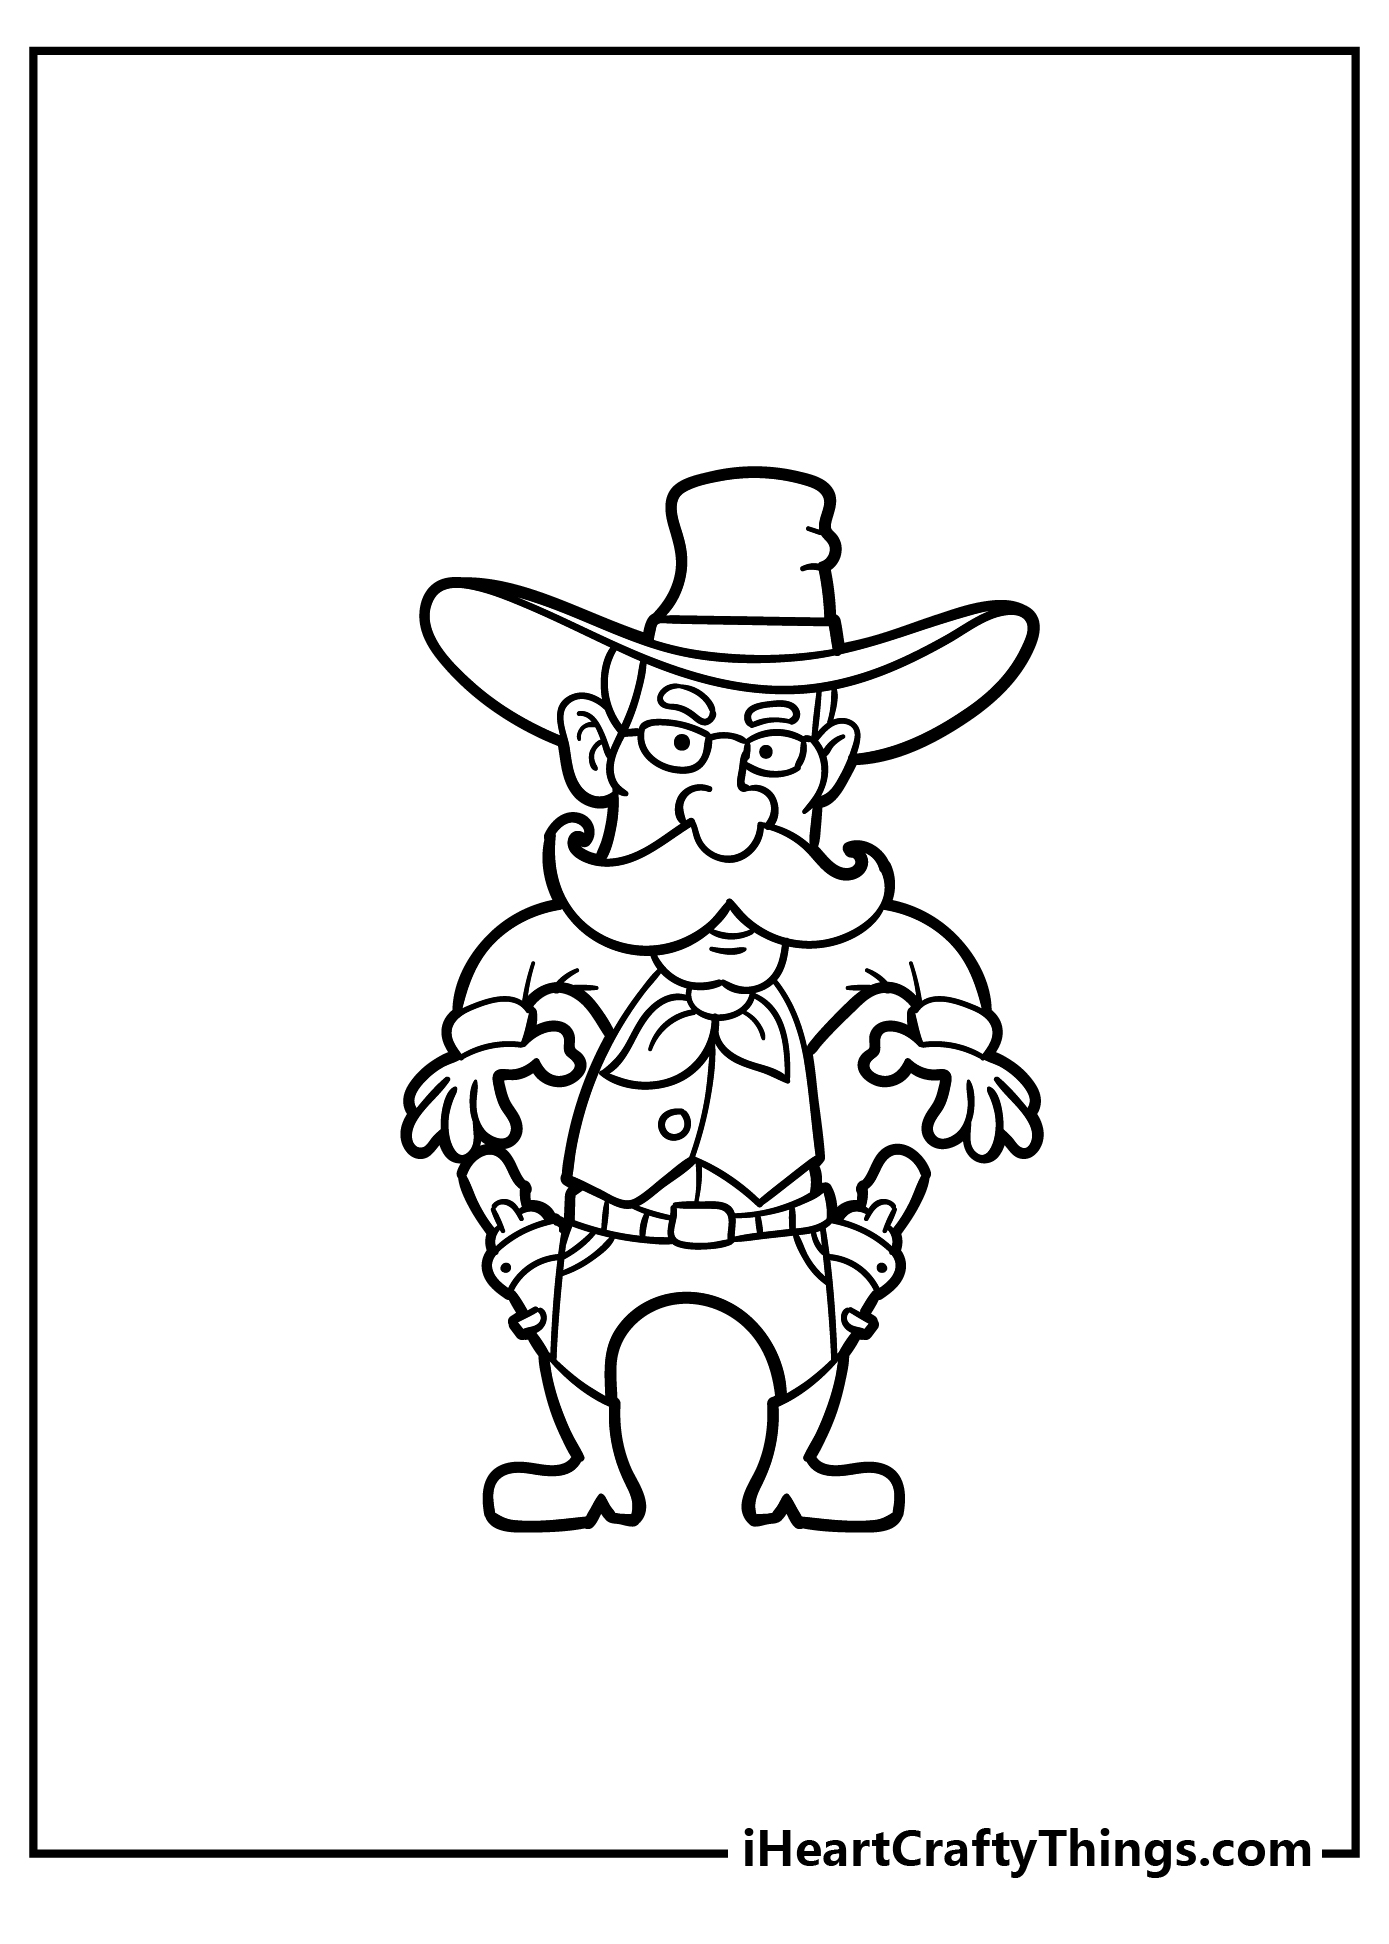 Cowboy Coloring Pages for adults free printable